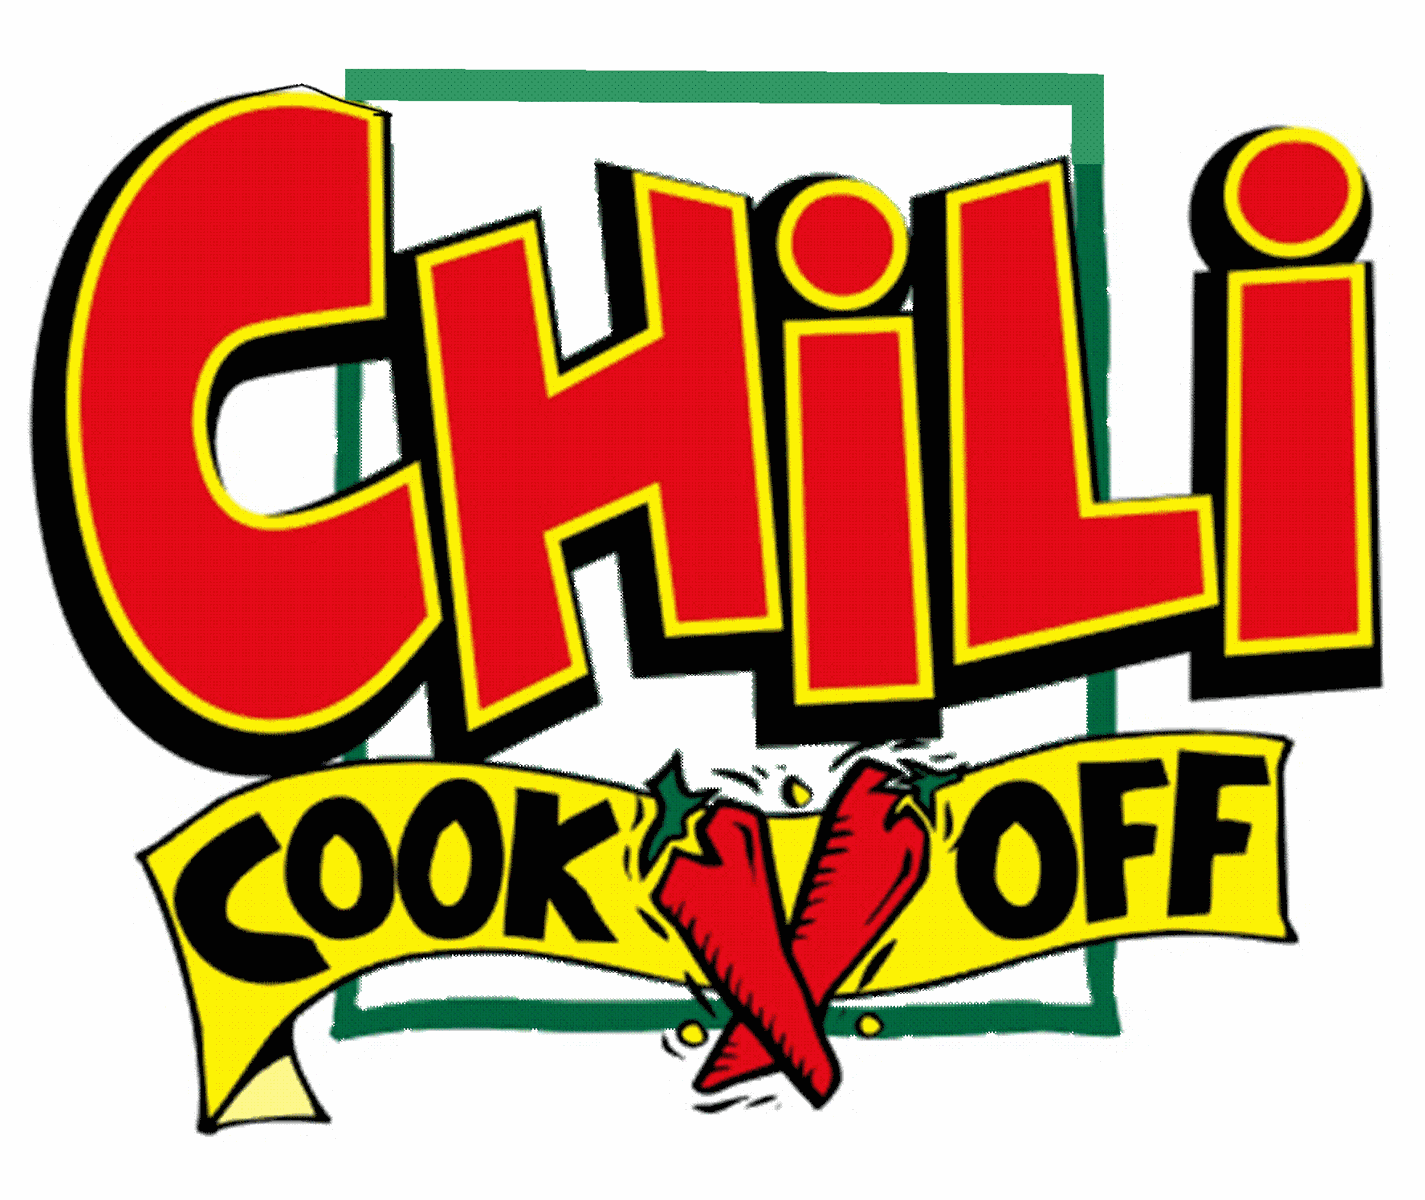 Chili Cookoff Is Here! » Trinity Evangelical Lutheran Church